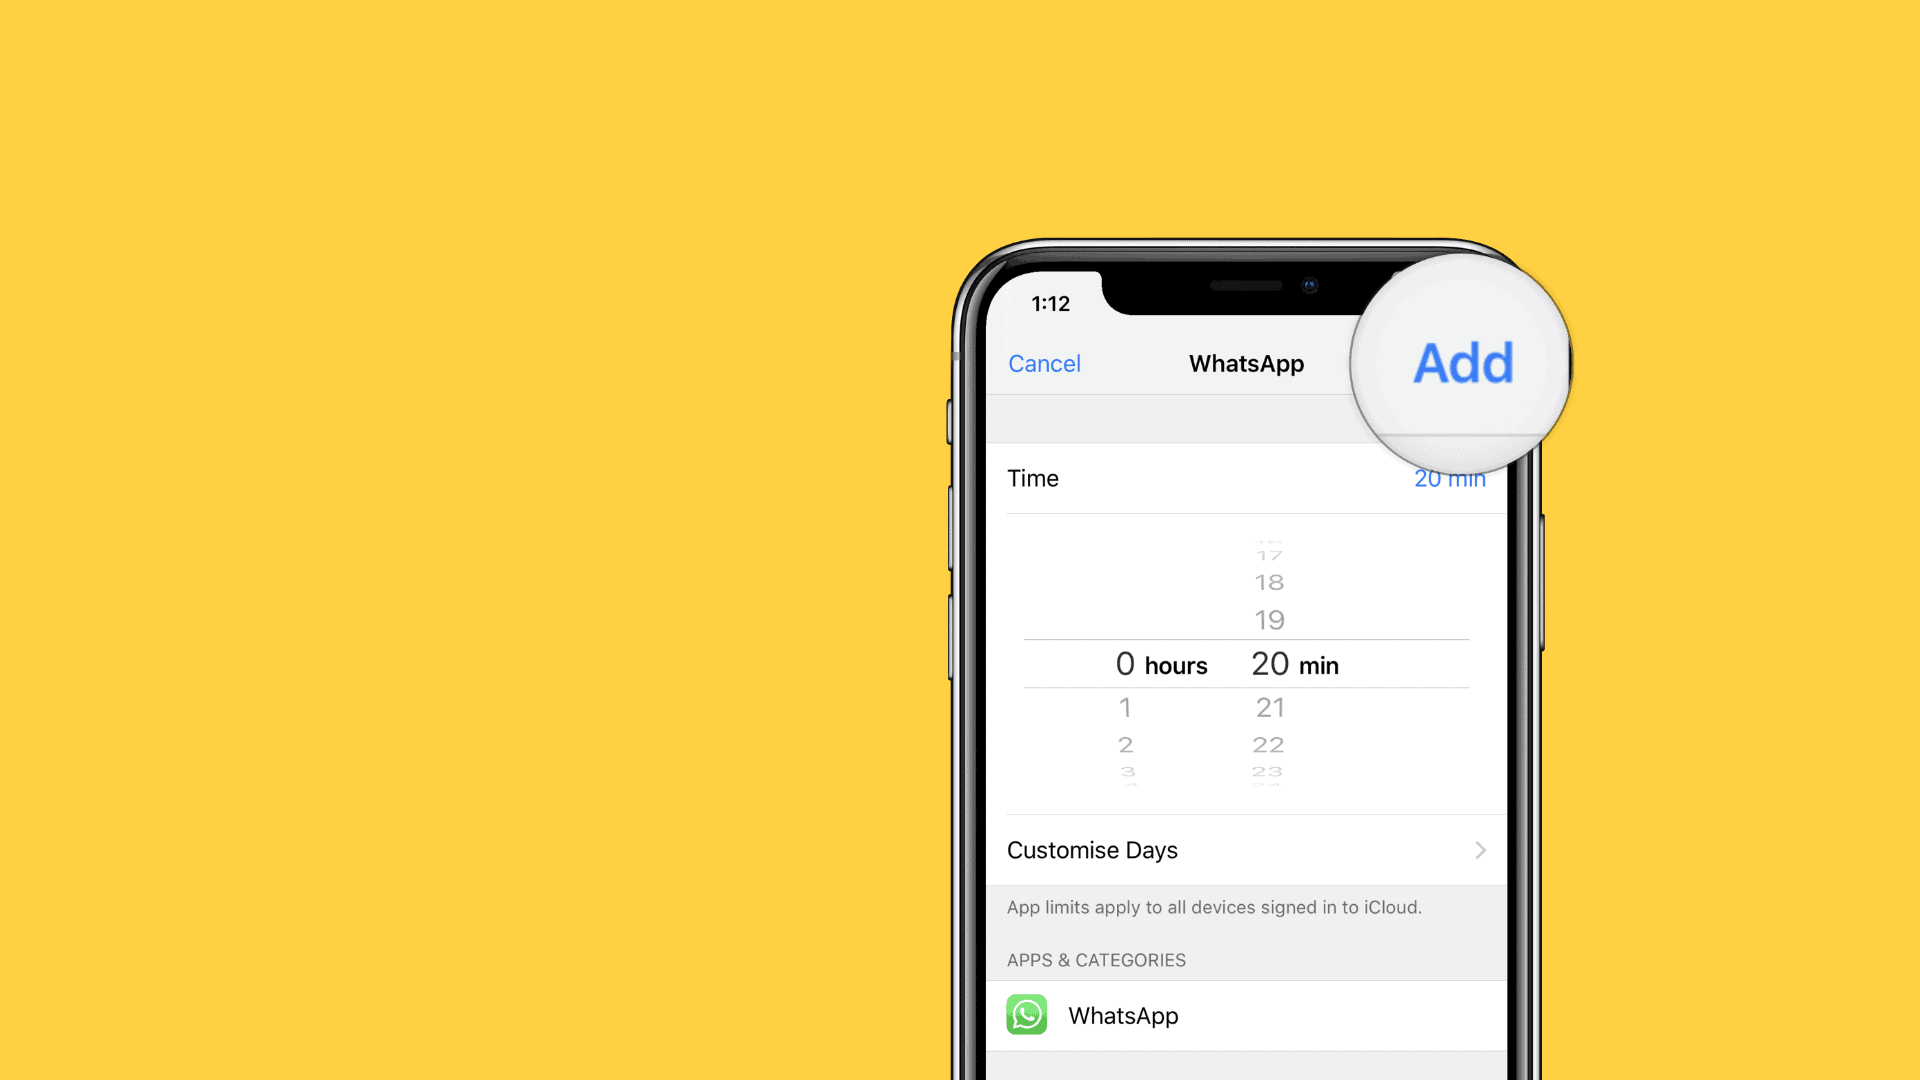 Screen Time Limit not working on iPhone running iOS 12? Here's a fix